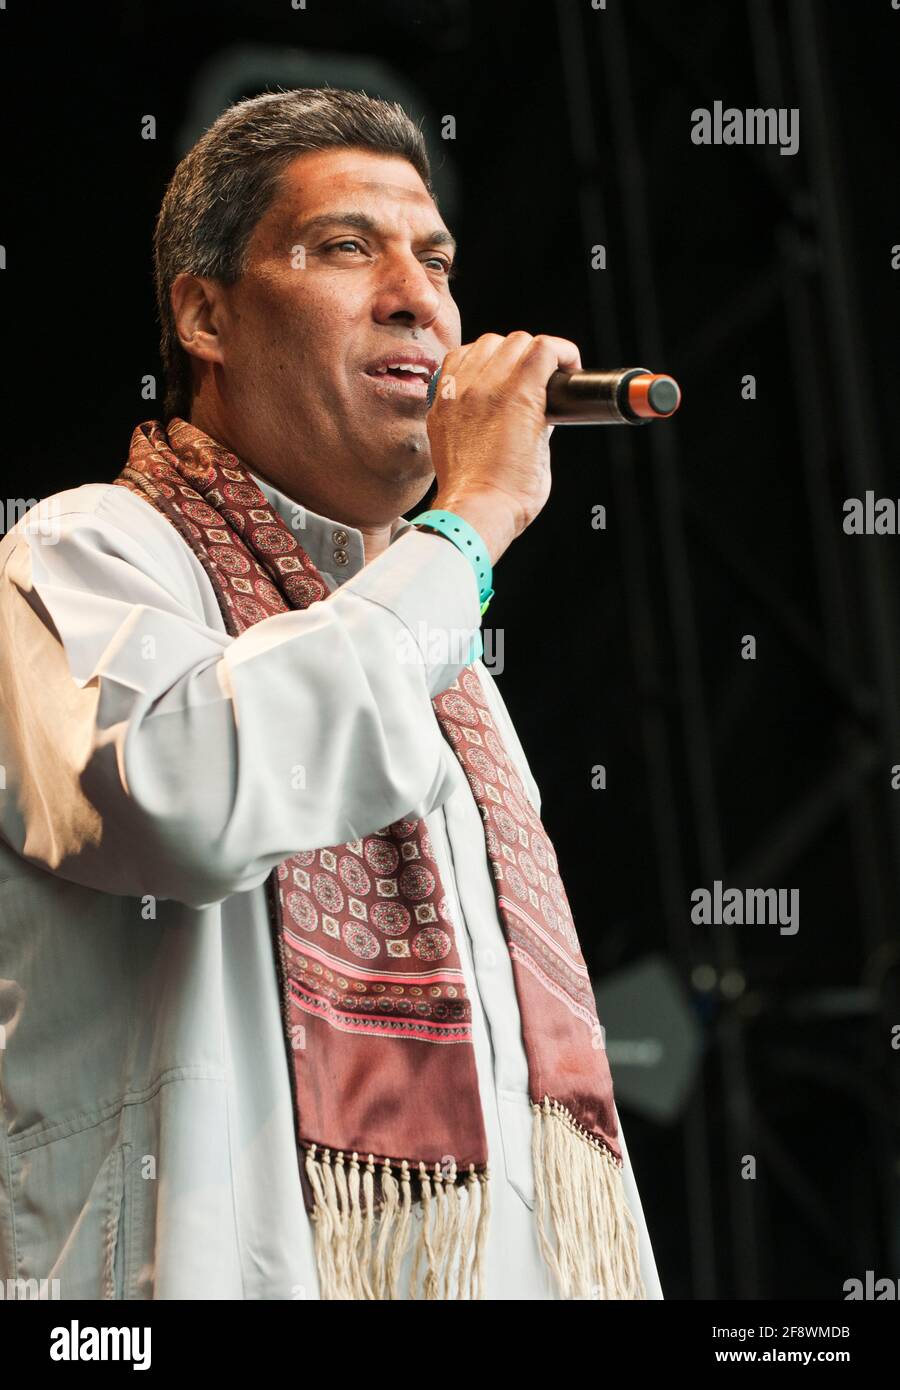 Gamal Abdel Wahed of Egyptian band, El Tanbura performing at the Womad Festival, UK, July 29, 2011. Stock Photo